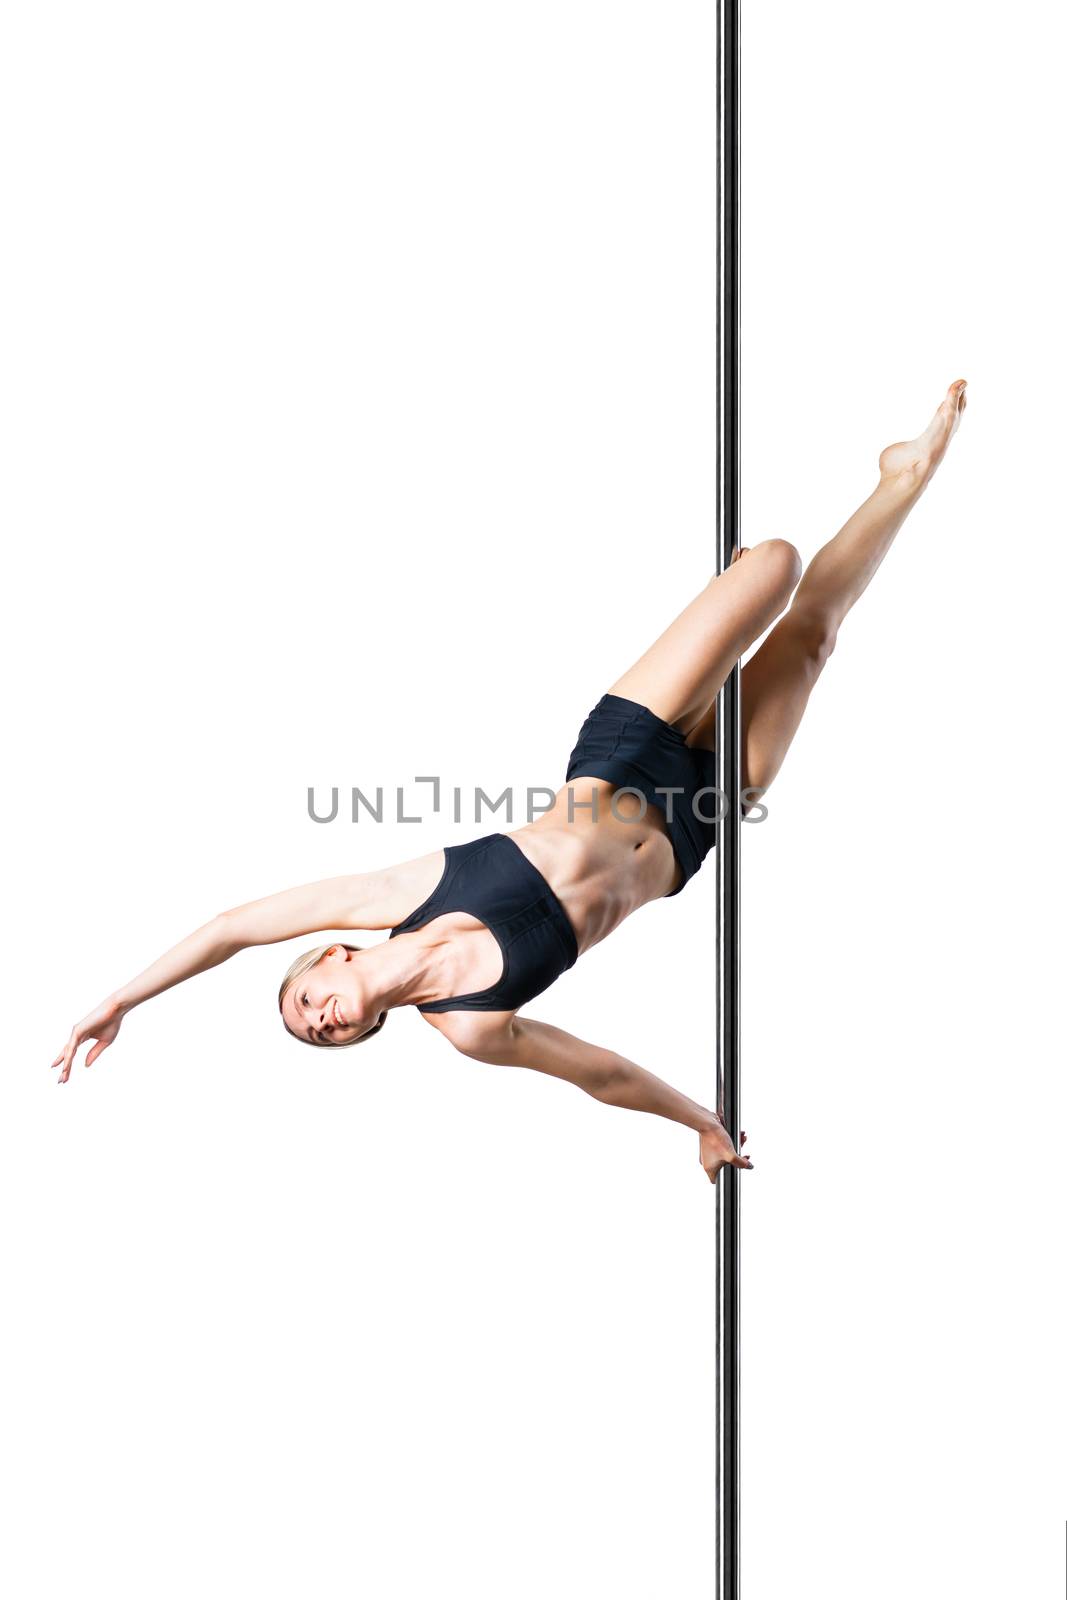 pole dance girl exercising and posing against white background